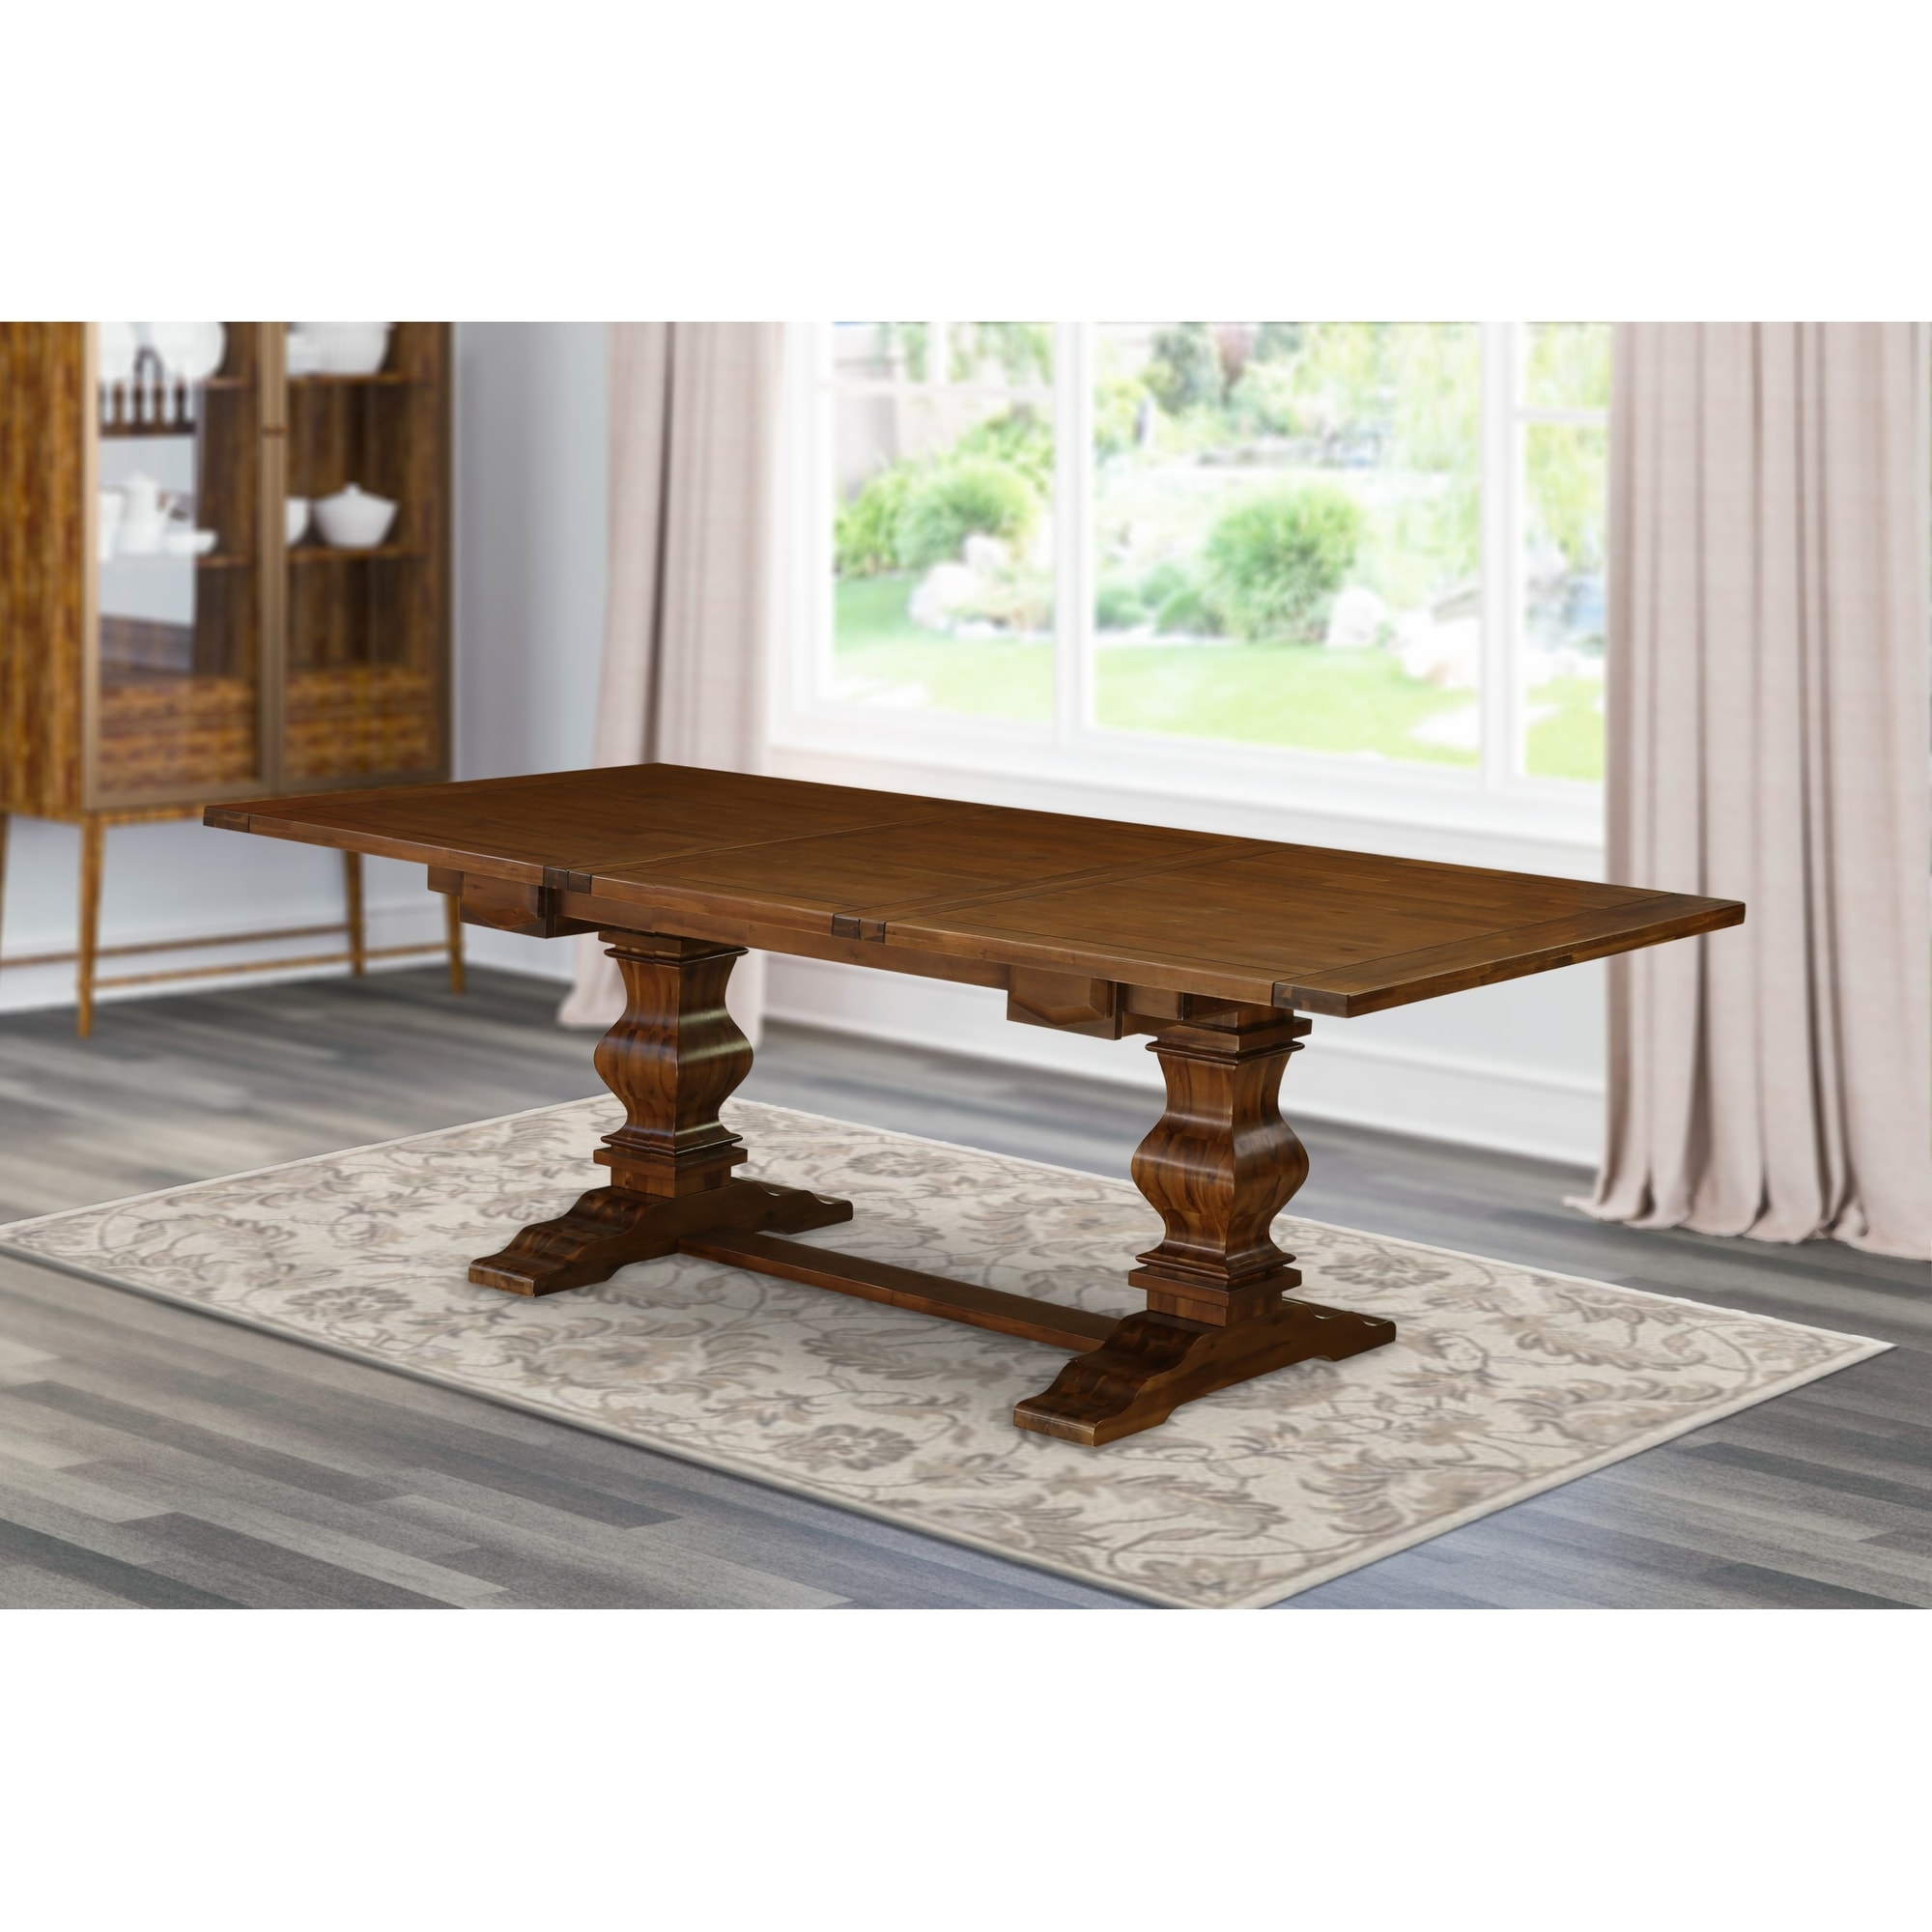 Shop Black Friday Deals On Rectangular Kitchen Table With Leaf And Solid Wood Kitchen Table Legs Overstock 32428434